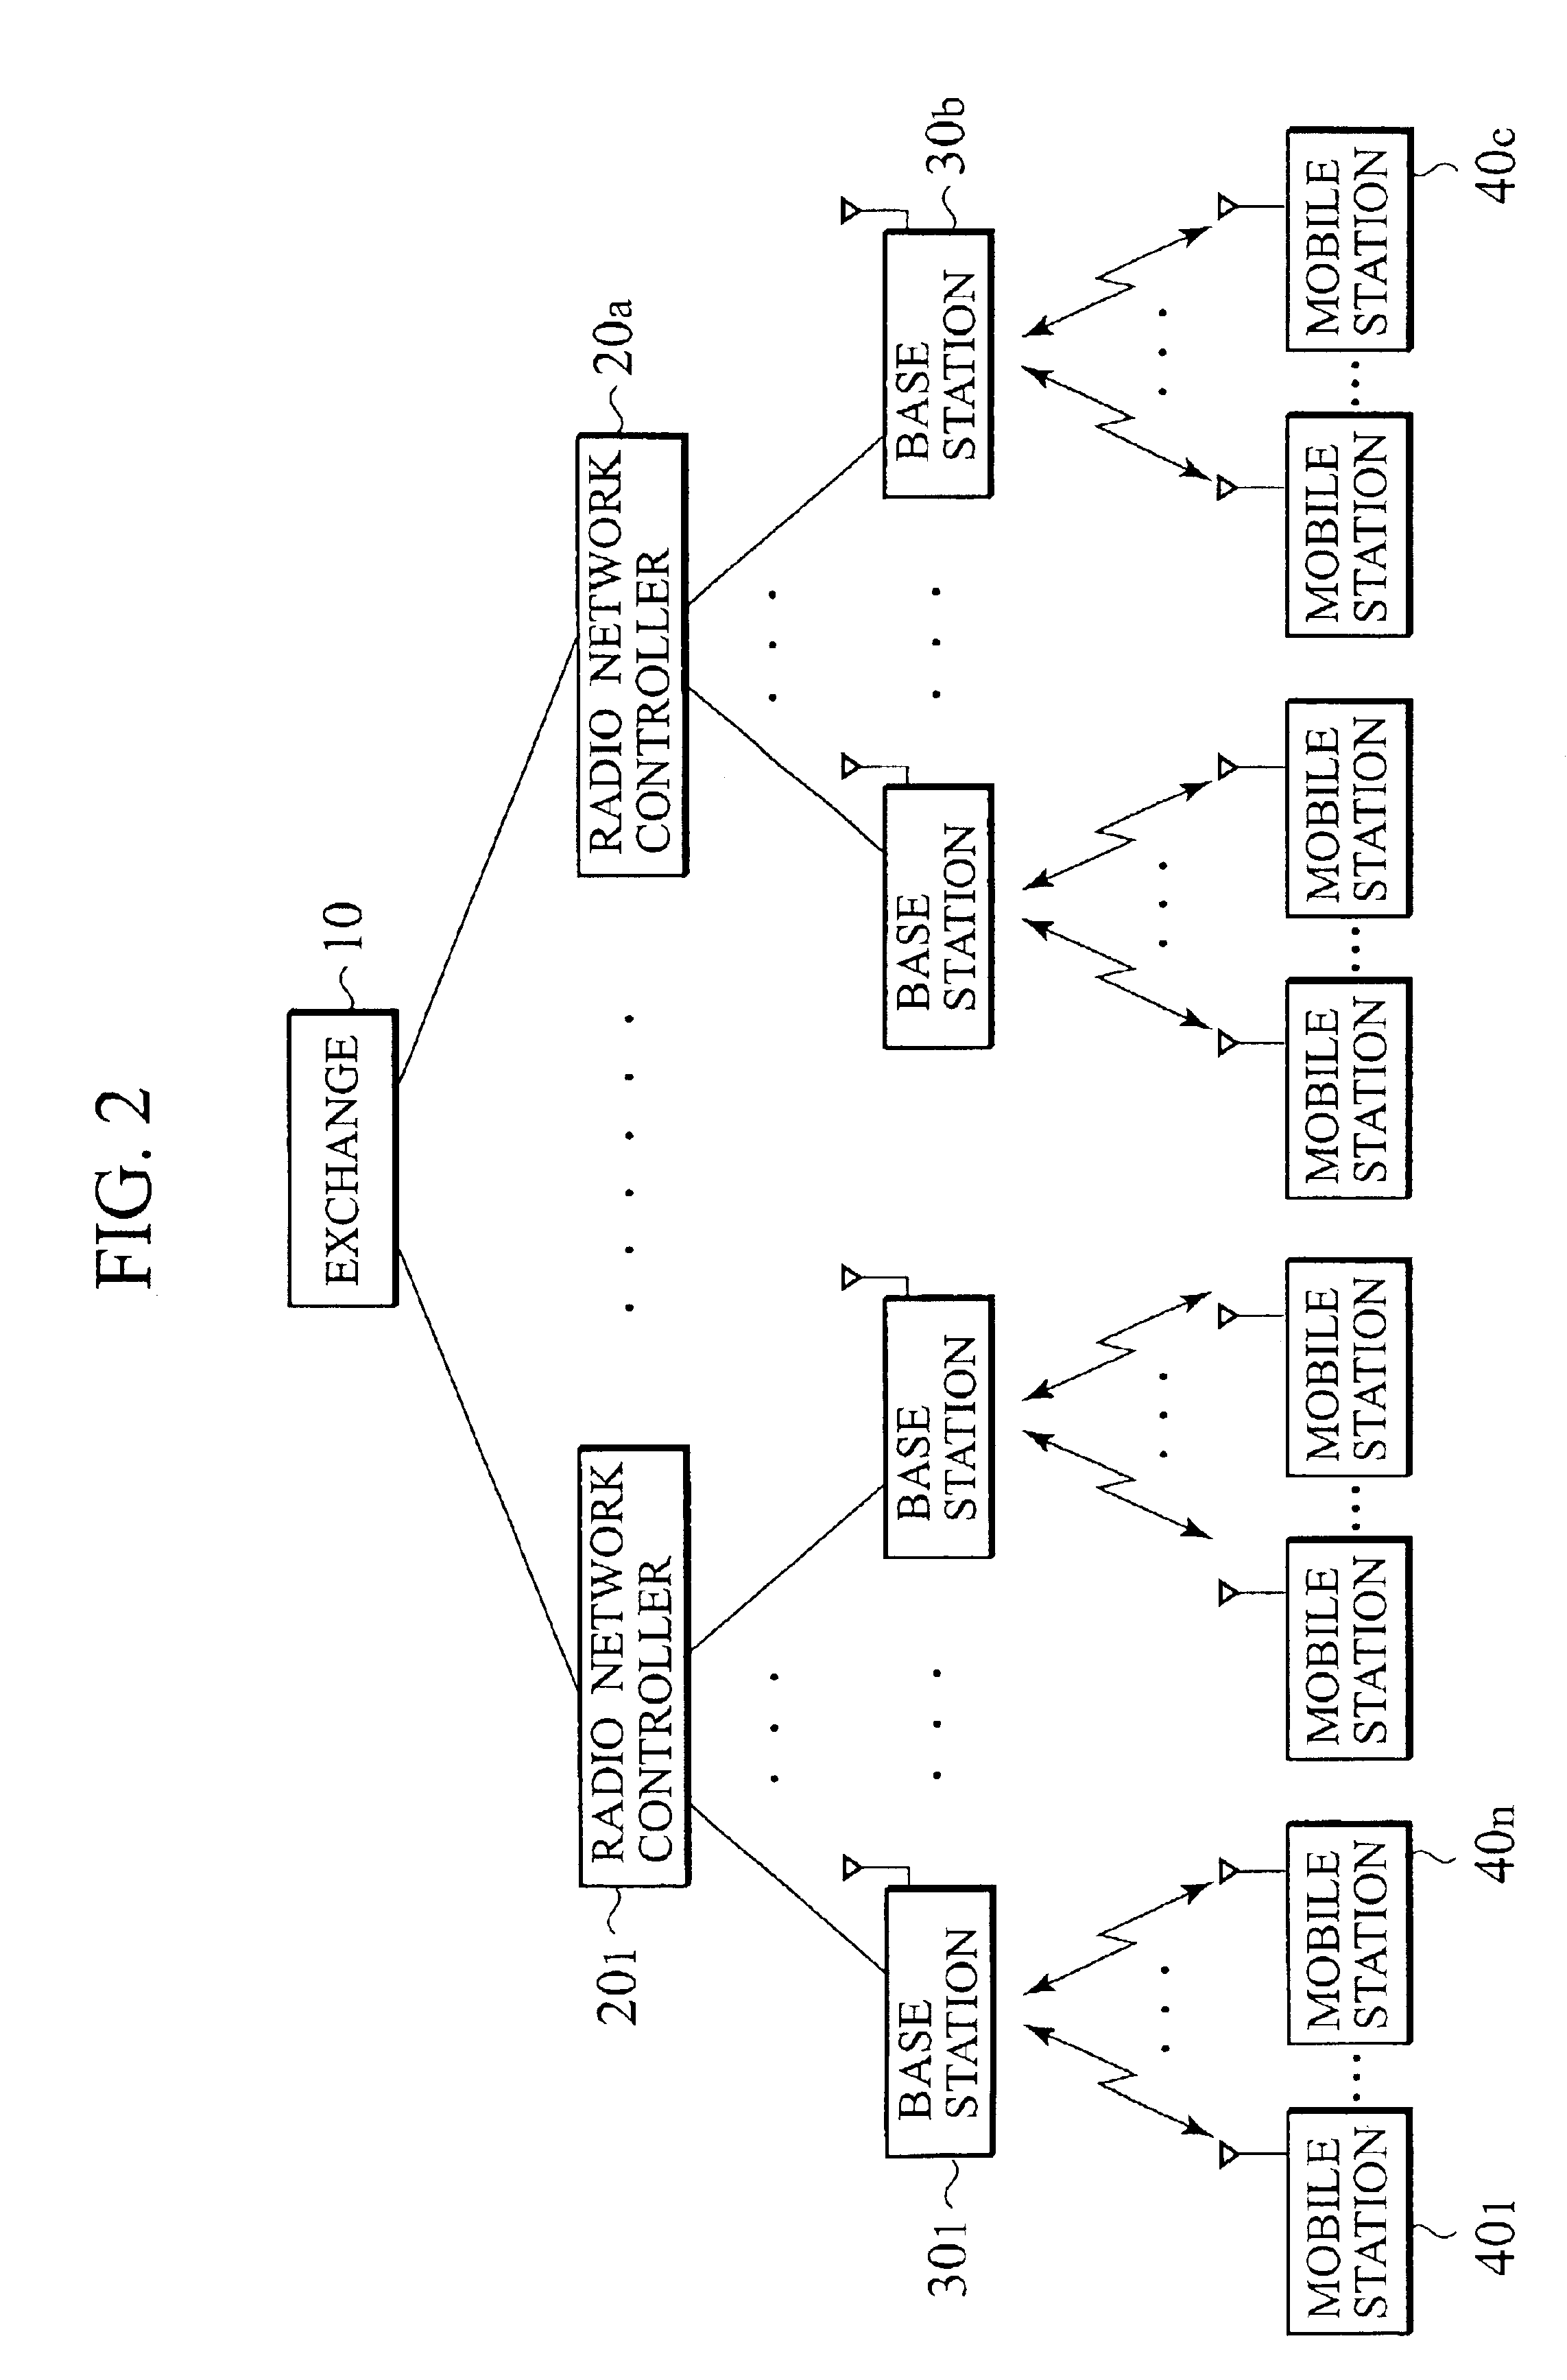 Control system, control method, and radio network controller preferably used for the system and method